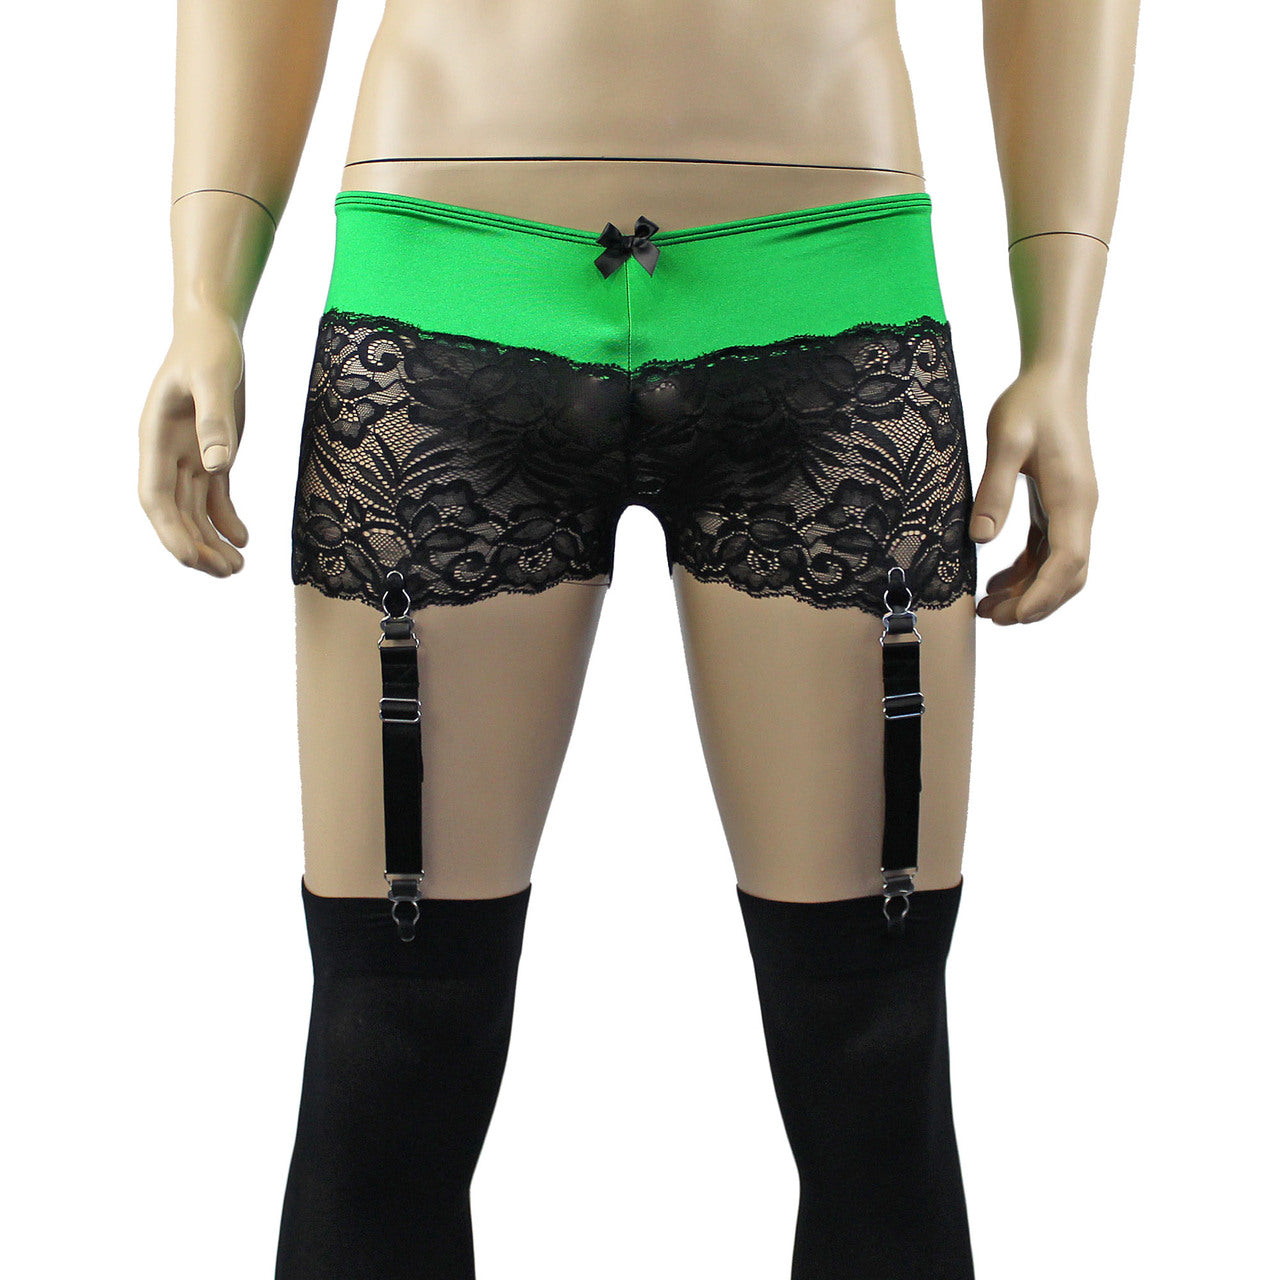 Mens Risque Boxer Briefs with Detachable Garters & Stockings Green and Black Lace